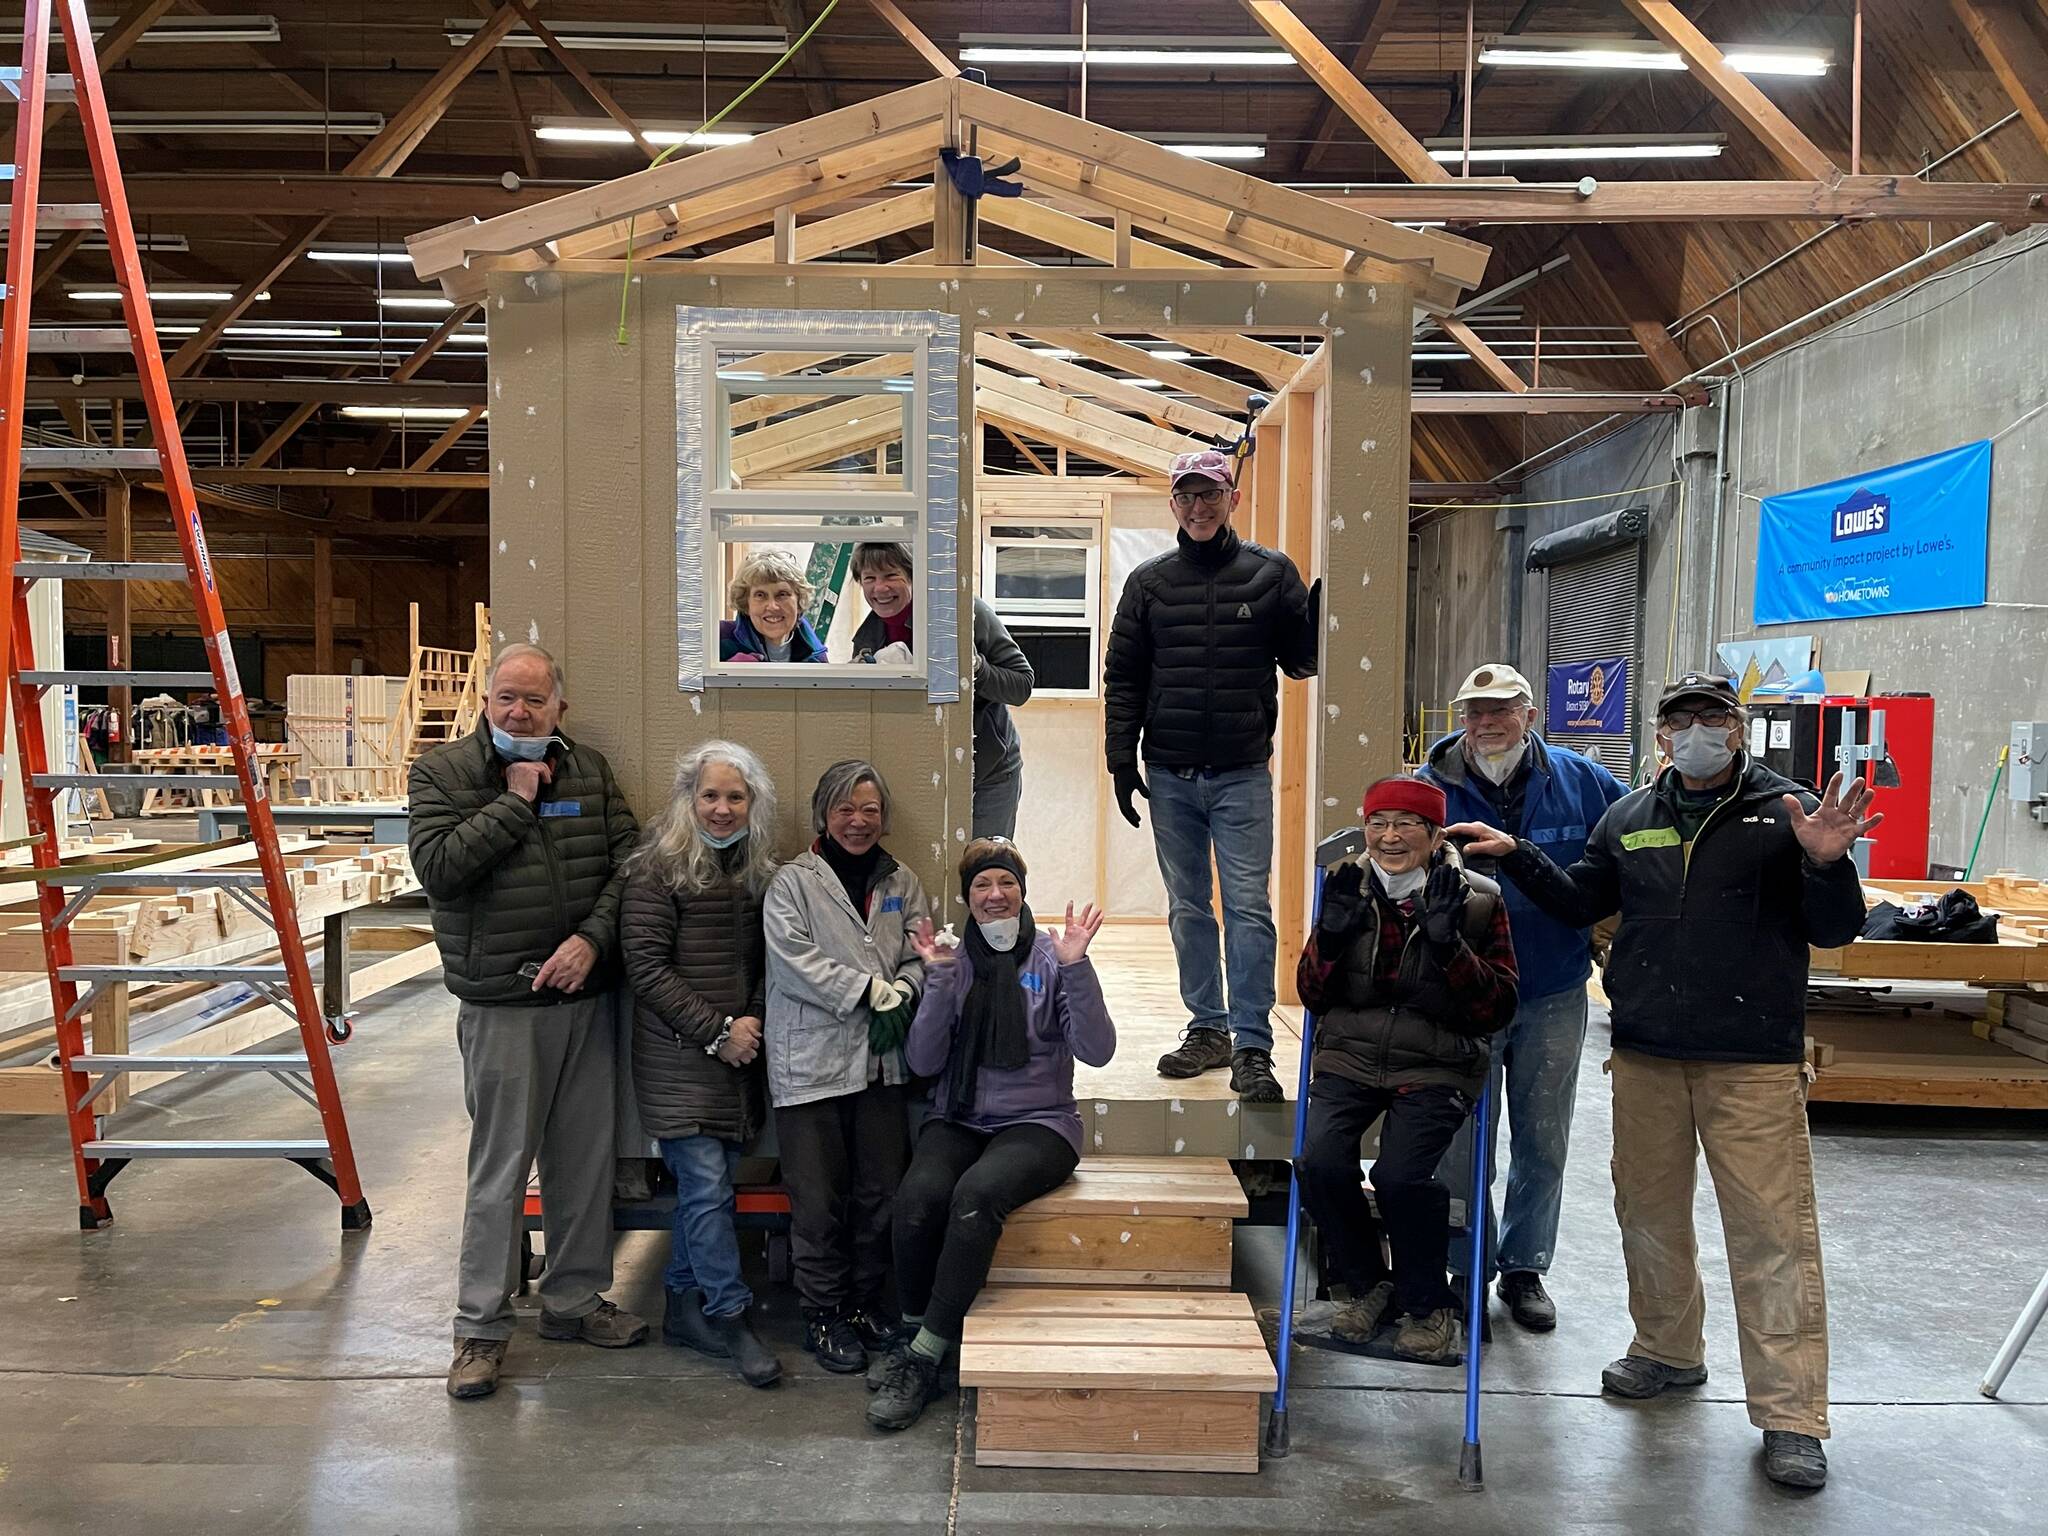 On Jan. 3, four Mercer Island Rotarians were part of a group that helped build a tiny home in coordination with Sound Foundations NW at the Hope Factory in Seattle. Sound Foundations NW, which partners with the Low Income Housing Institute to construct the abodes, states on its website: “Imagine what it would be like during the pandemic not to have a home. Nowhere safe and secure to keep you from the virus. That’s why we have been deemed an essential organization and are building transitional tiny homes as fast as we can. The homes are for healthy homeless folks to stay healthy and away from the virus.” Pictured Rotarians are Bunnie Cundiff (sitting on stairs); Edie Warner (in window to the right); Mike Finn (standing, second from right); and Terry Lee (farthest right). For more information, visit https://www.soundfoundationsnw.org/ . Courtesy photo